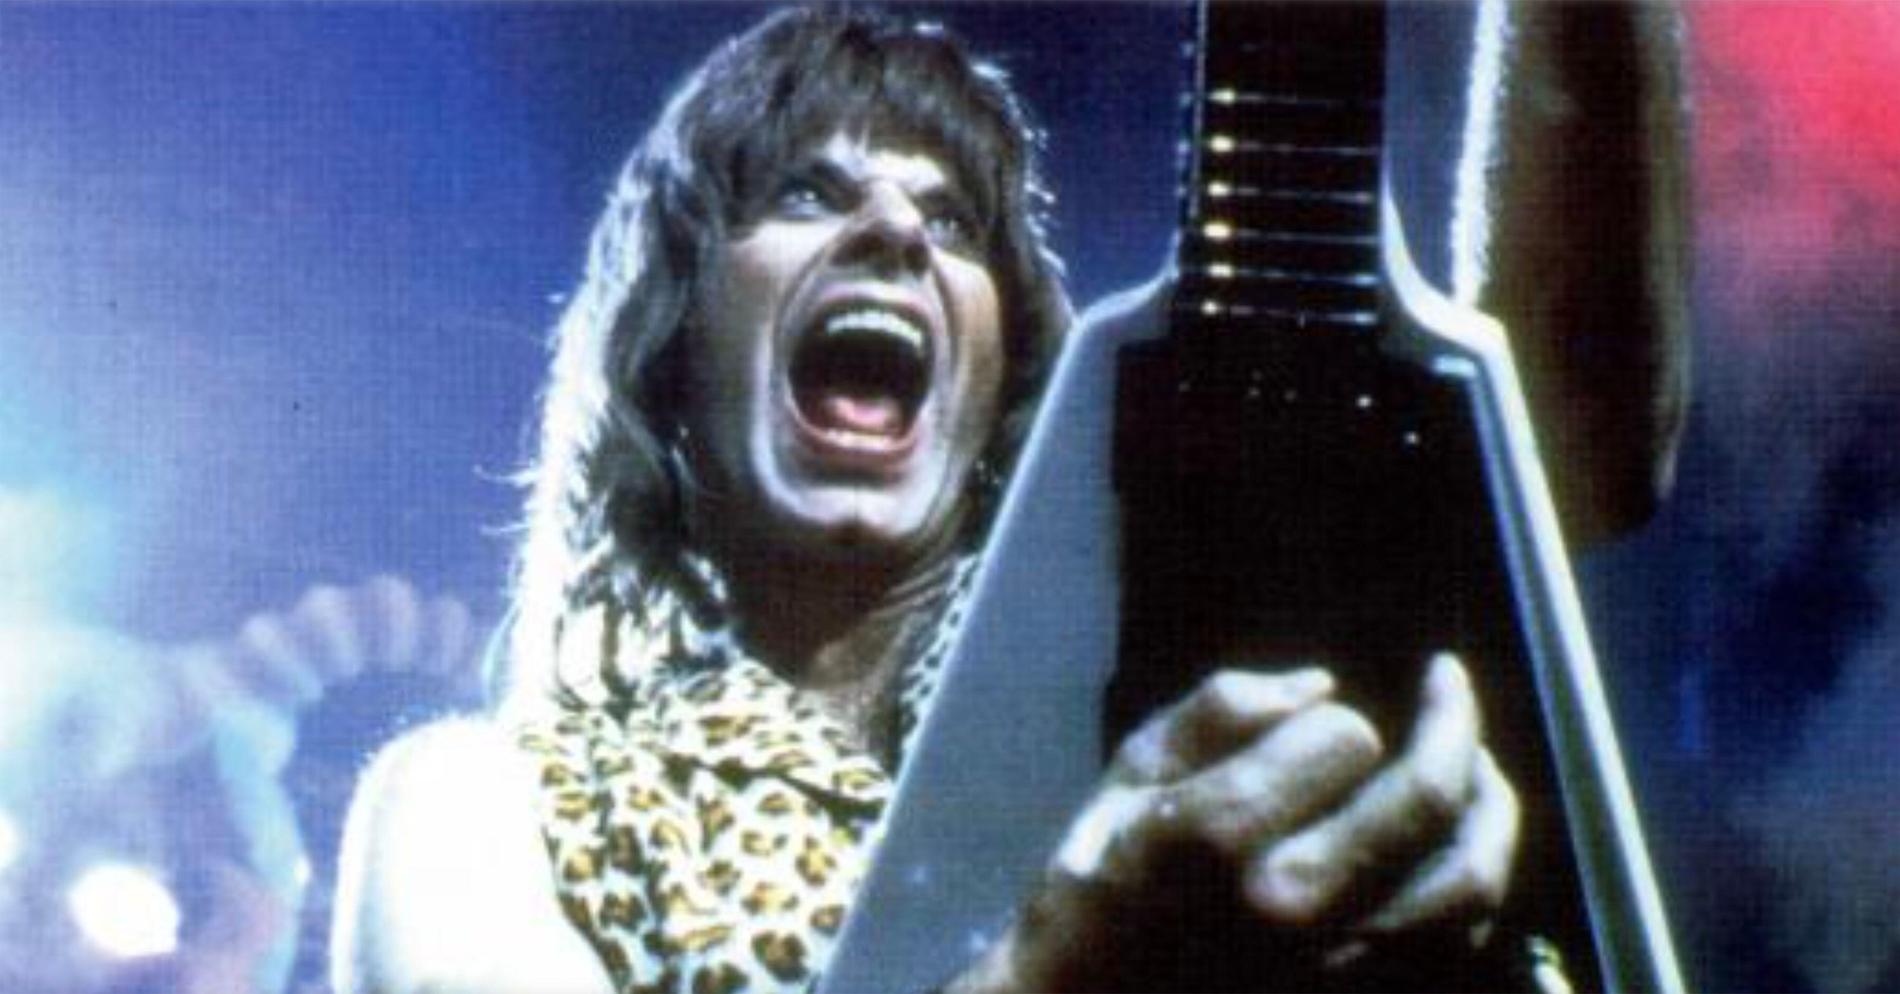 ”Spinal Tap”.